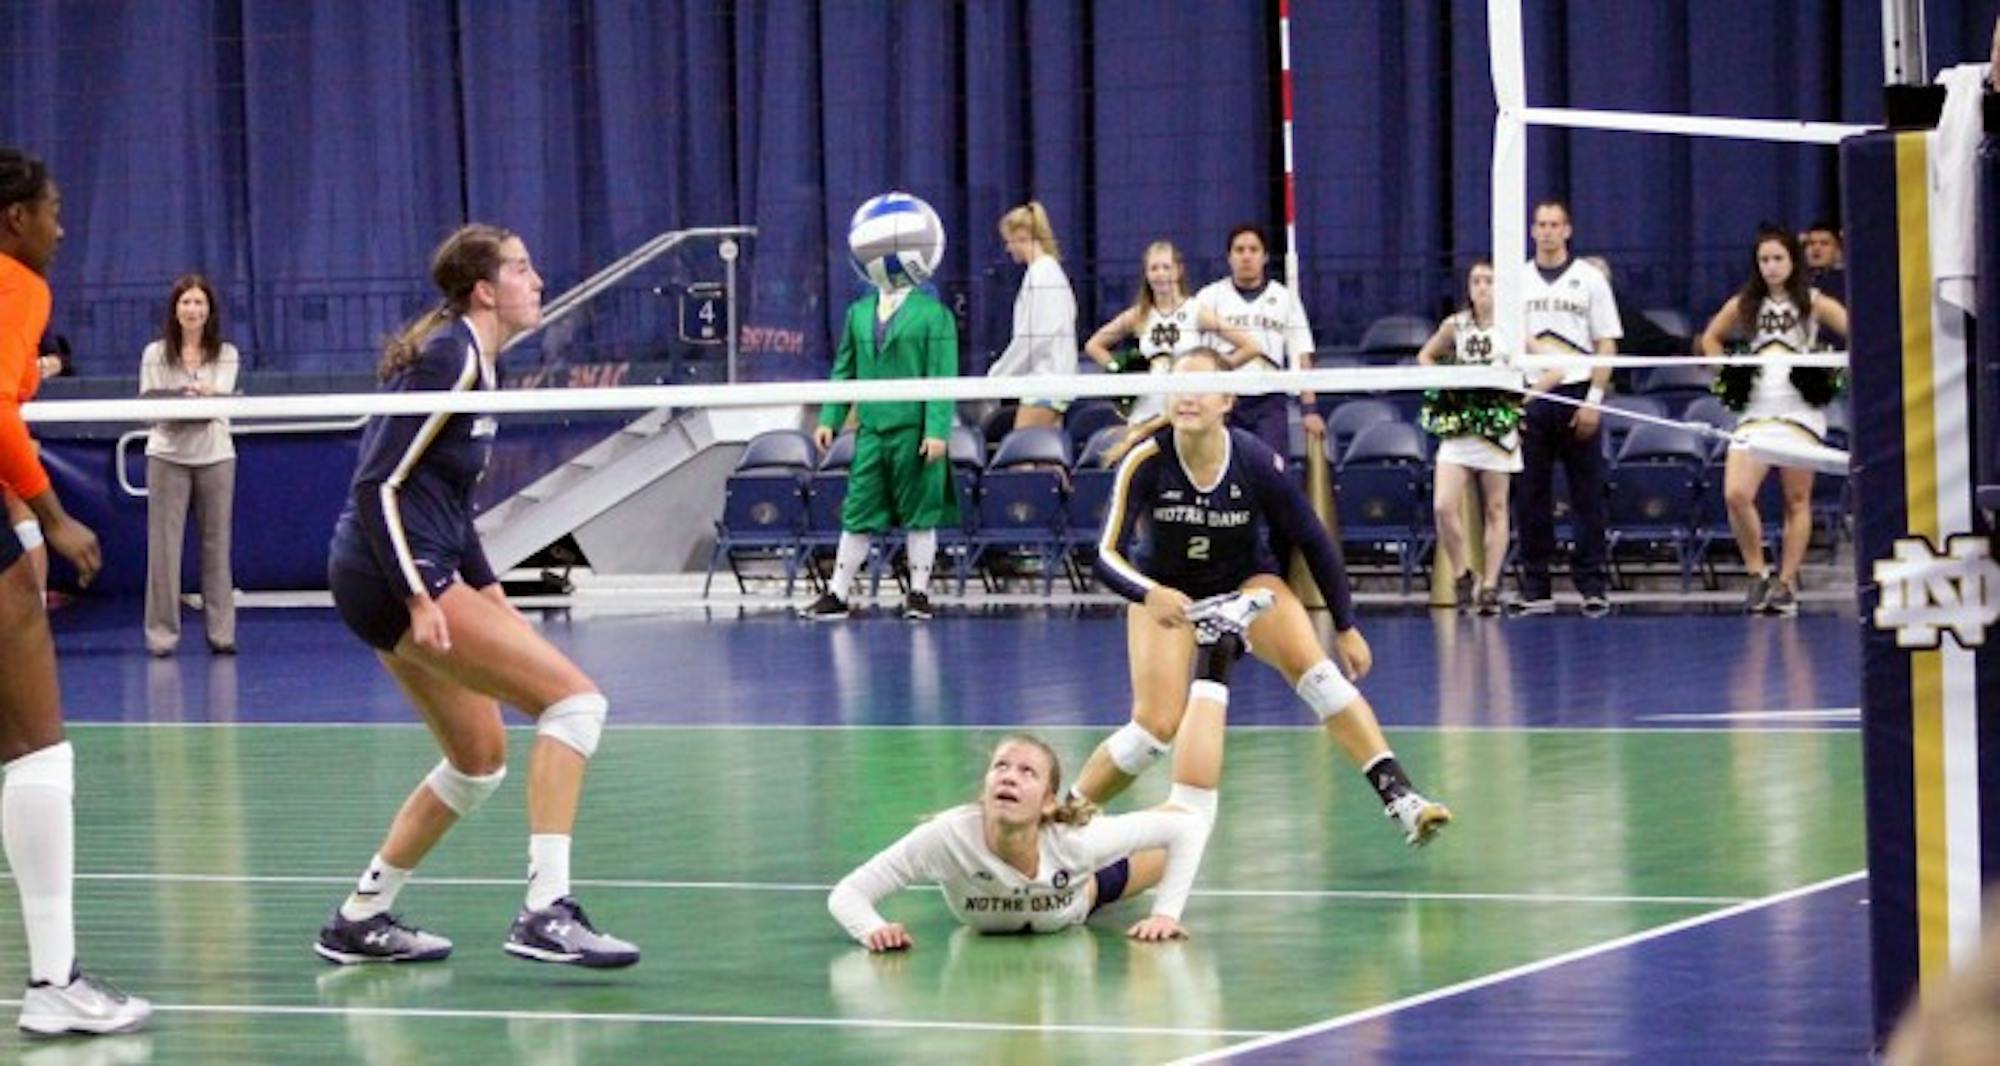 Irish freshman libero Ryann DeJarld completes a dig during Notre Dame’s 3-2 loss to Syracuse on Oct. 4 at Purcell Pavilion.